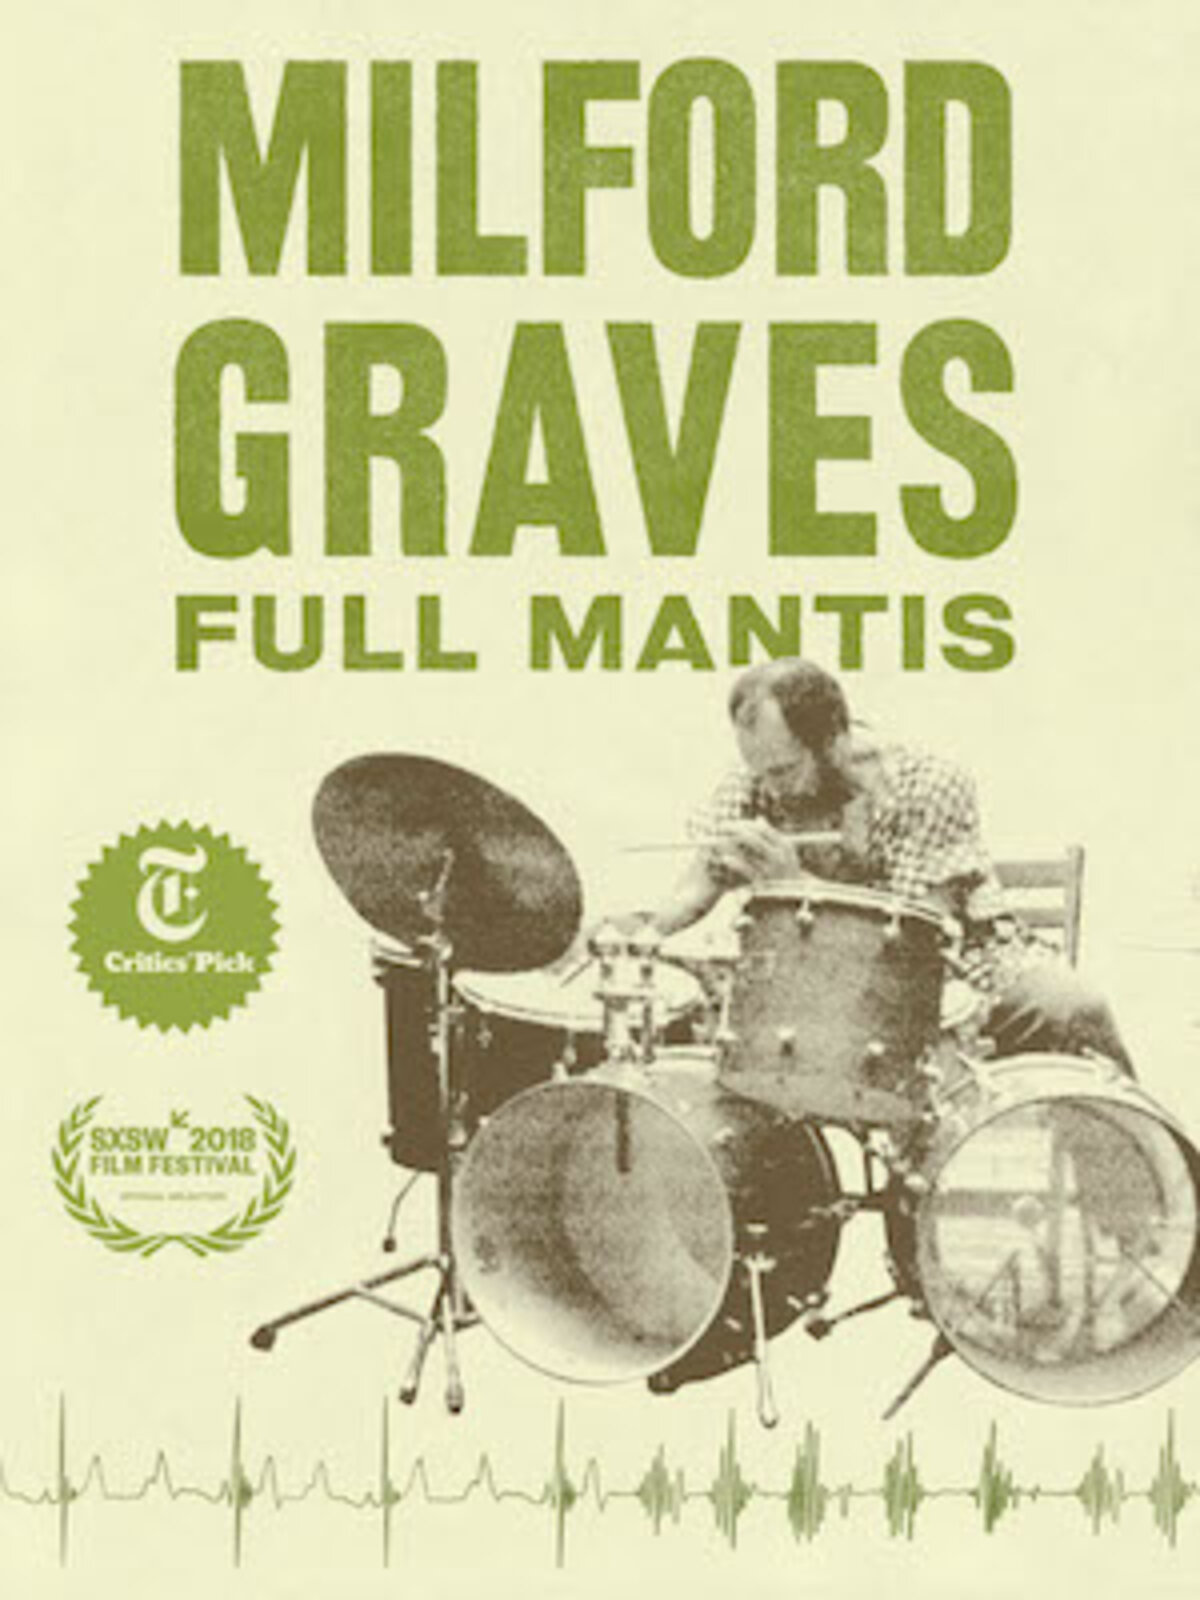 A sketch portrait of Milford Graves playing the drums for Milford Graves Full Mantis poster